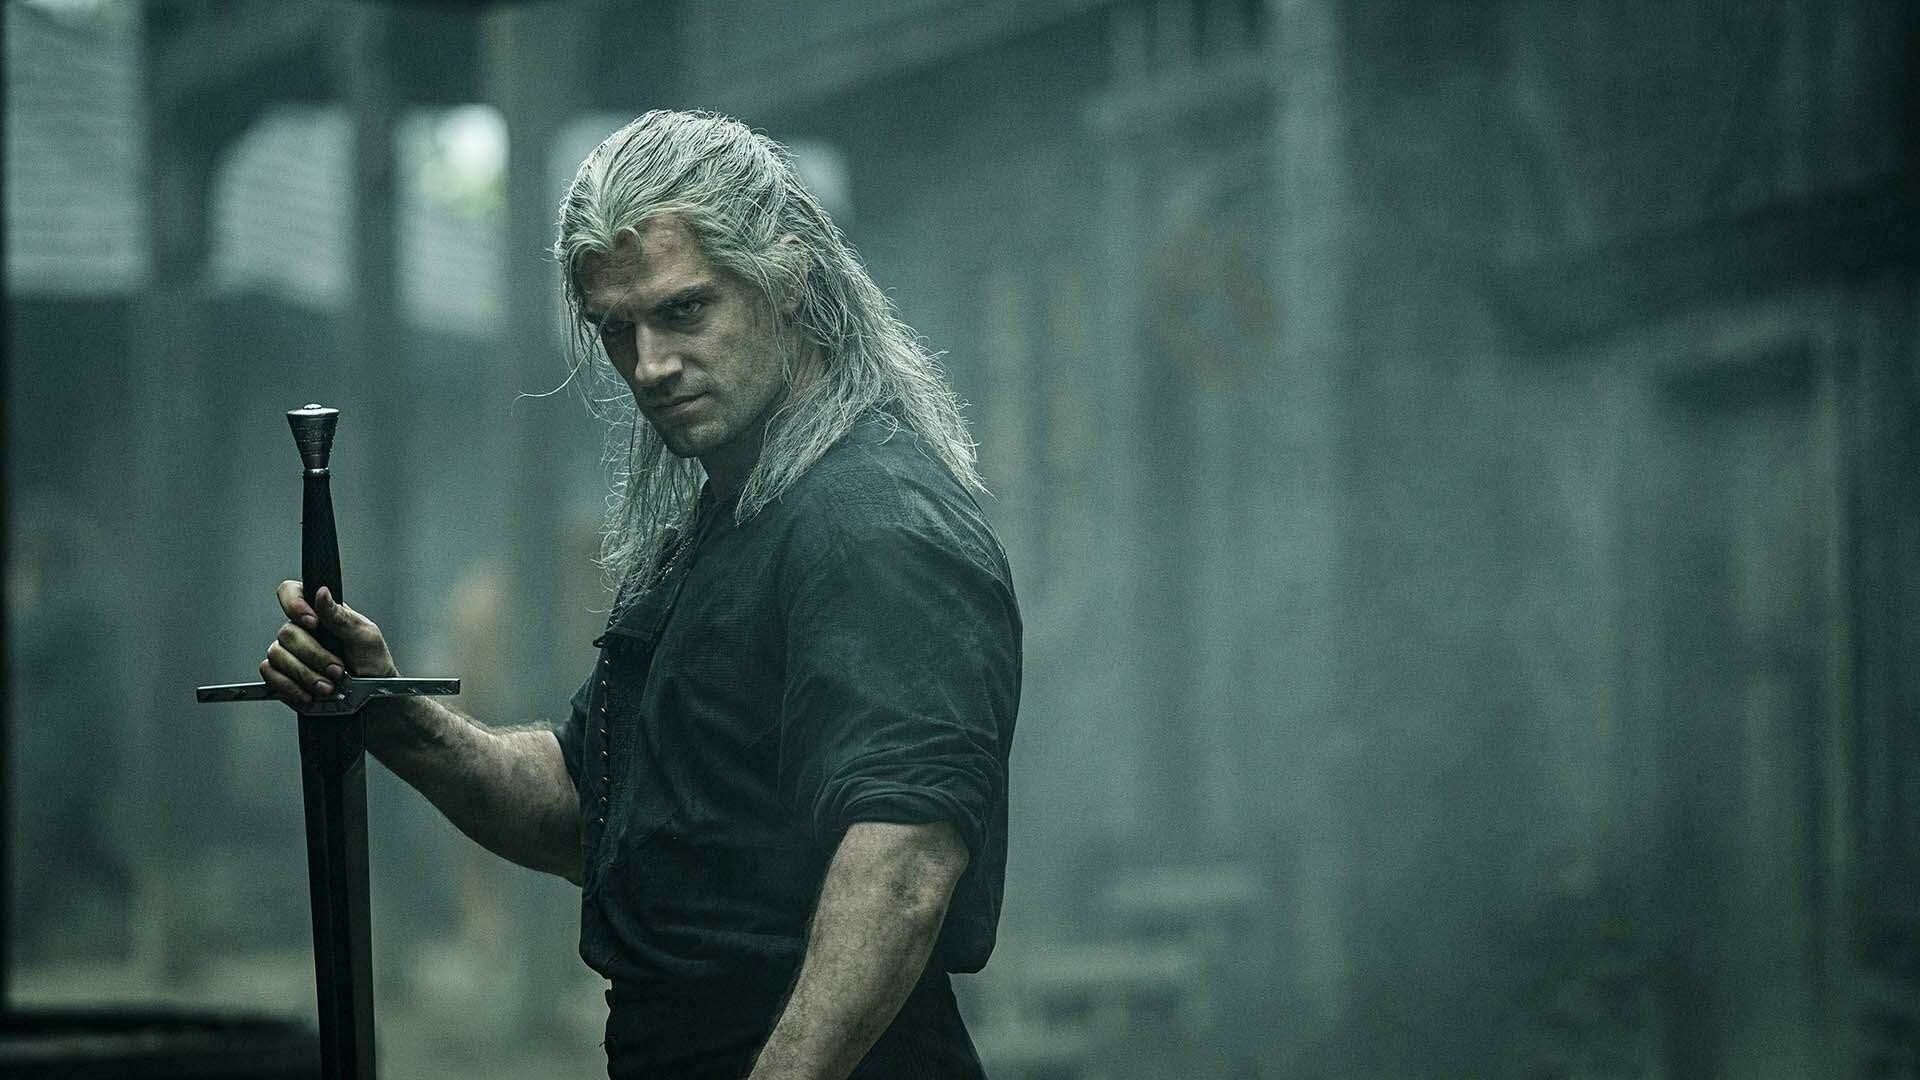 Netflix: Action, Adventure, Fantasy, A legendary witcher of the School of the Wolf. 1920x1080 Full HD Background.